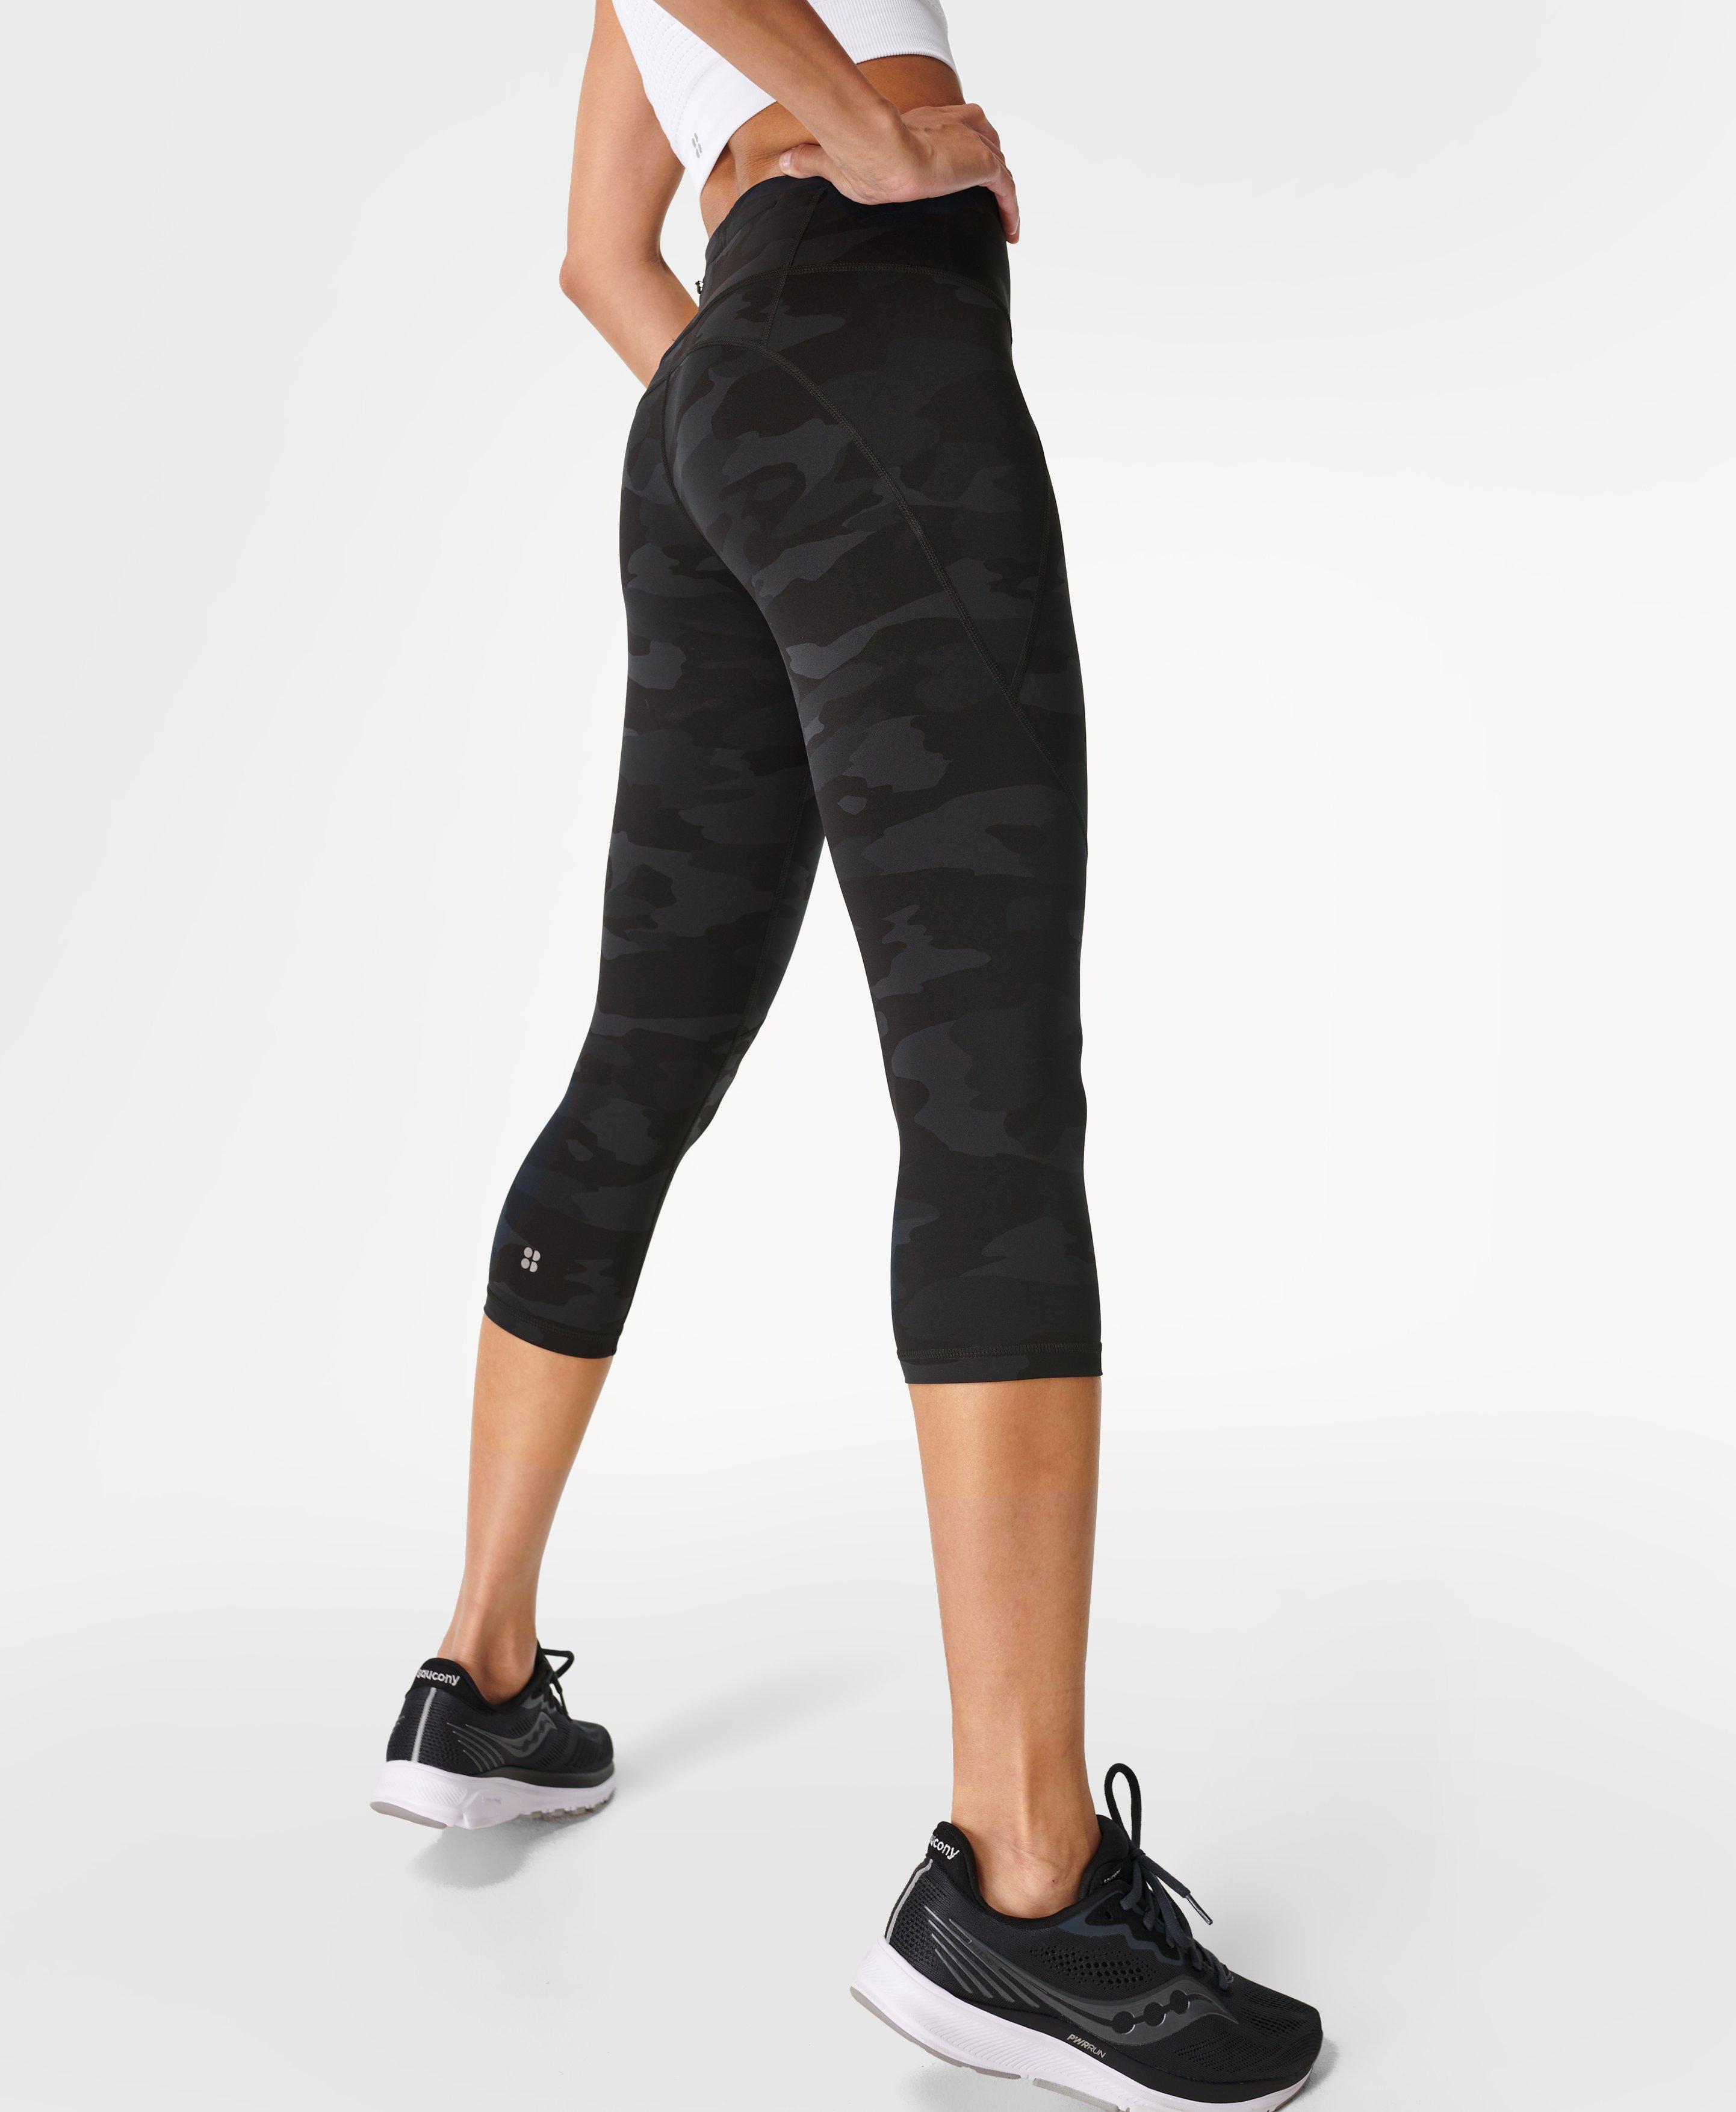 Power core cropped workout leggings , Brand- power